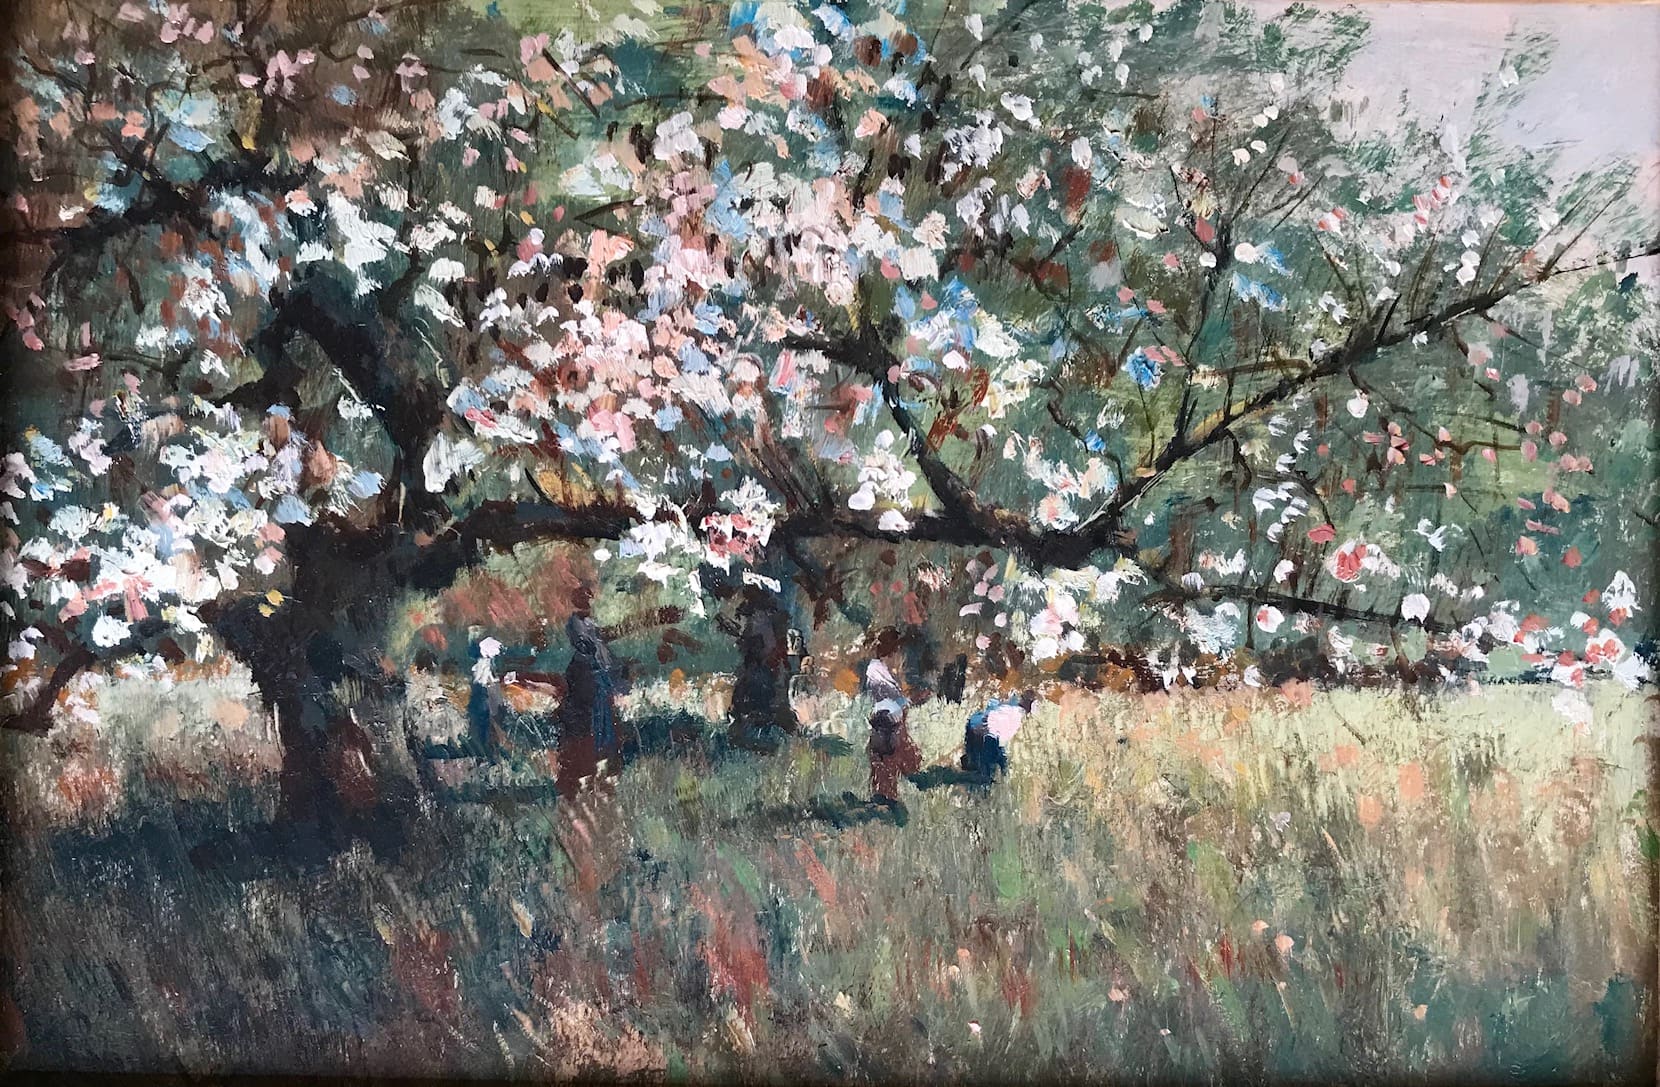 Donald Purdy's Cherry Blossoms. A beautiful cherry tree in full blossom. Children play beneath